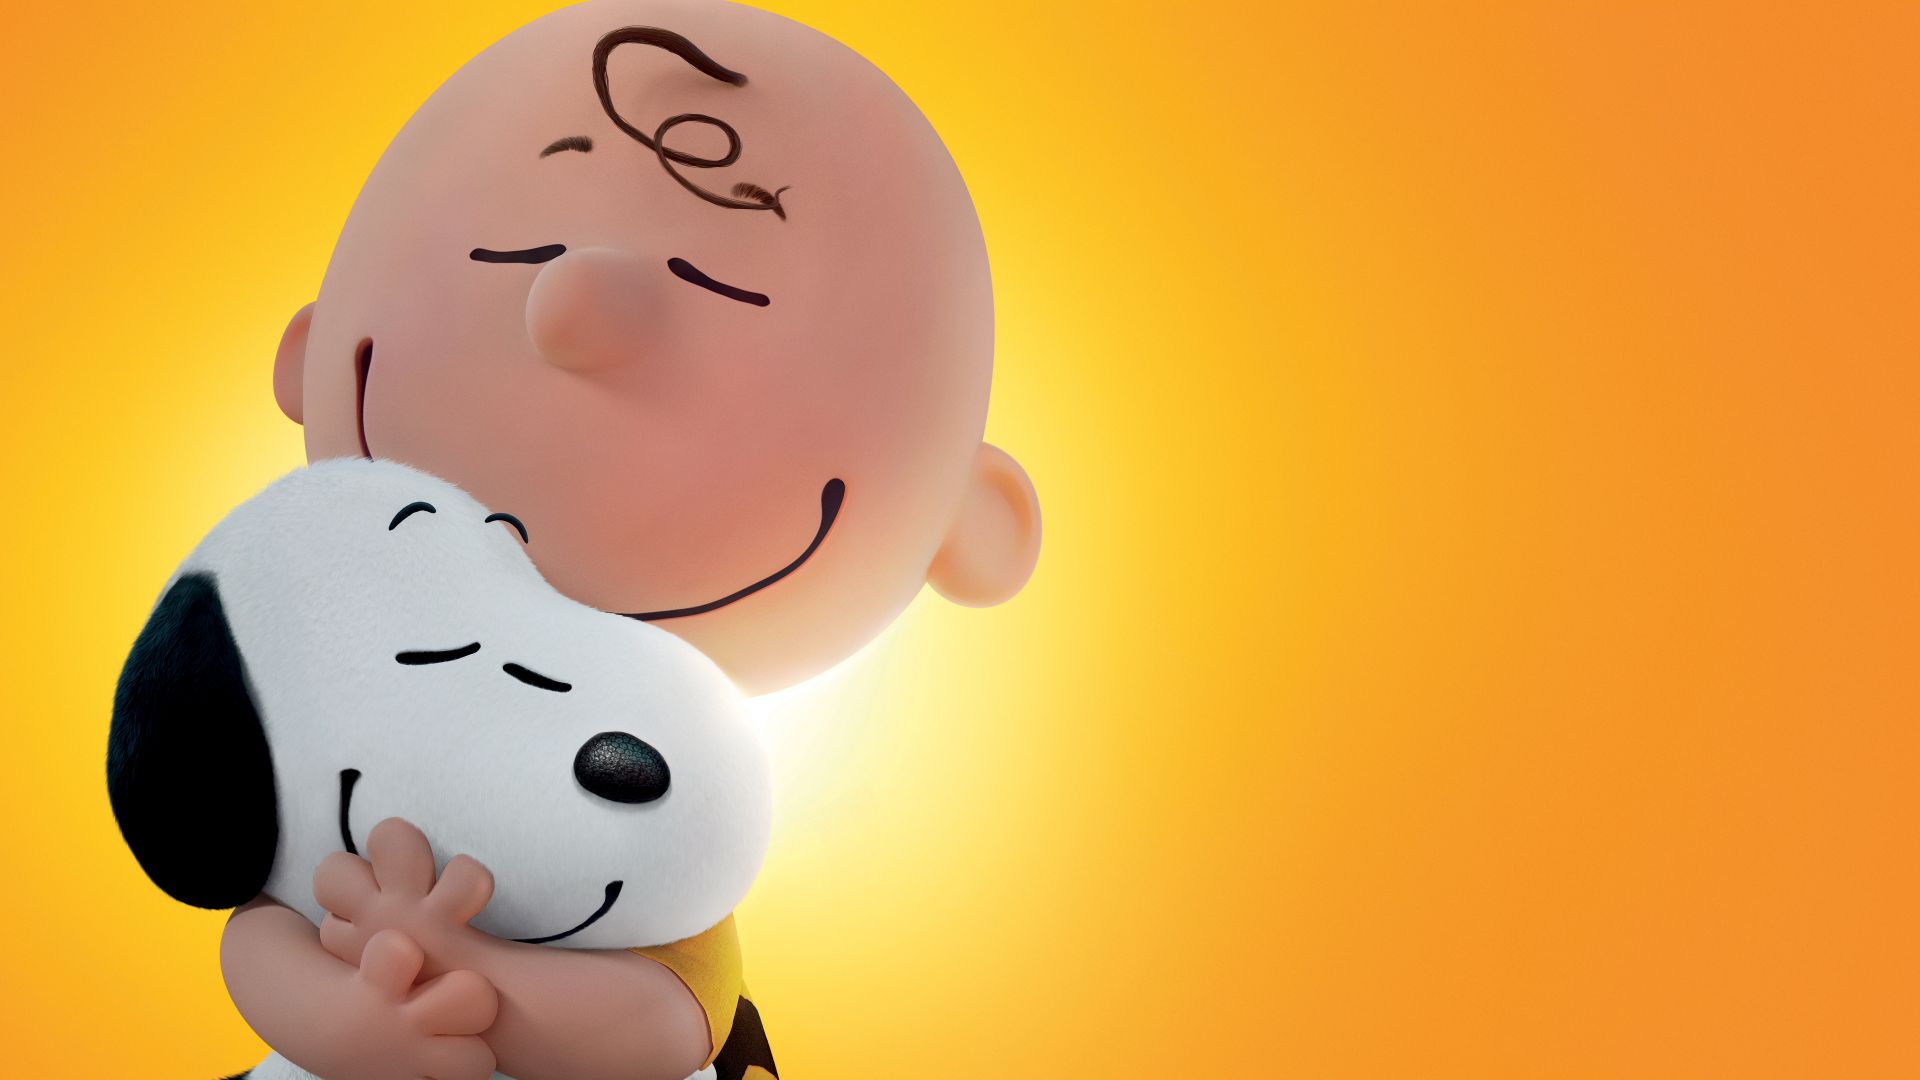 Desktop Wallpaper Charlie Brown, Snoopy, The Peanuts Movie, HD Image, Picture, Background, Bya8v